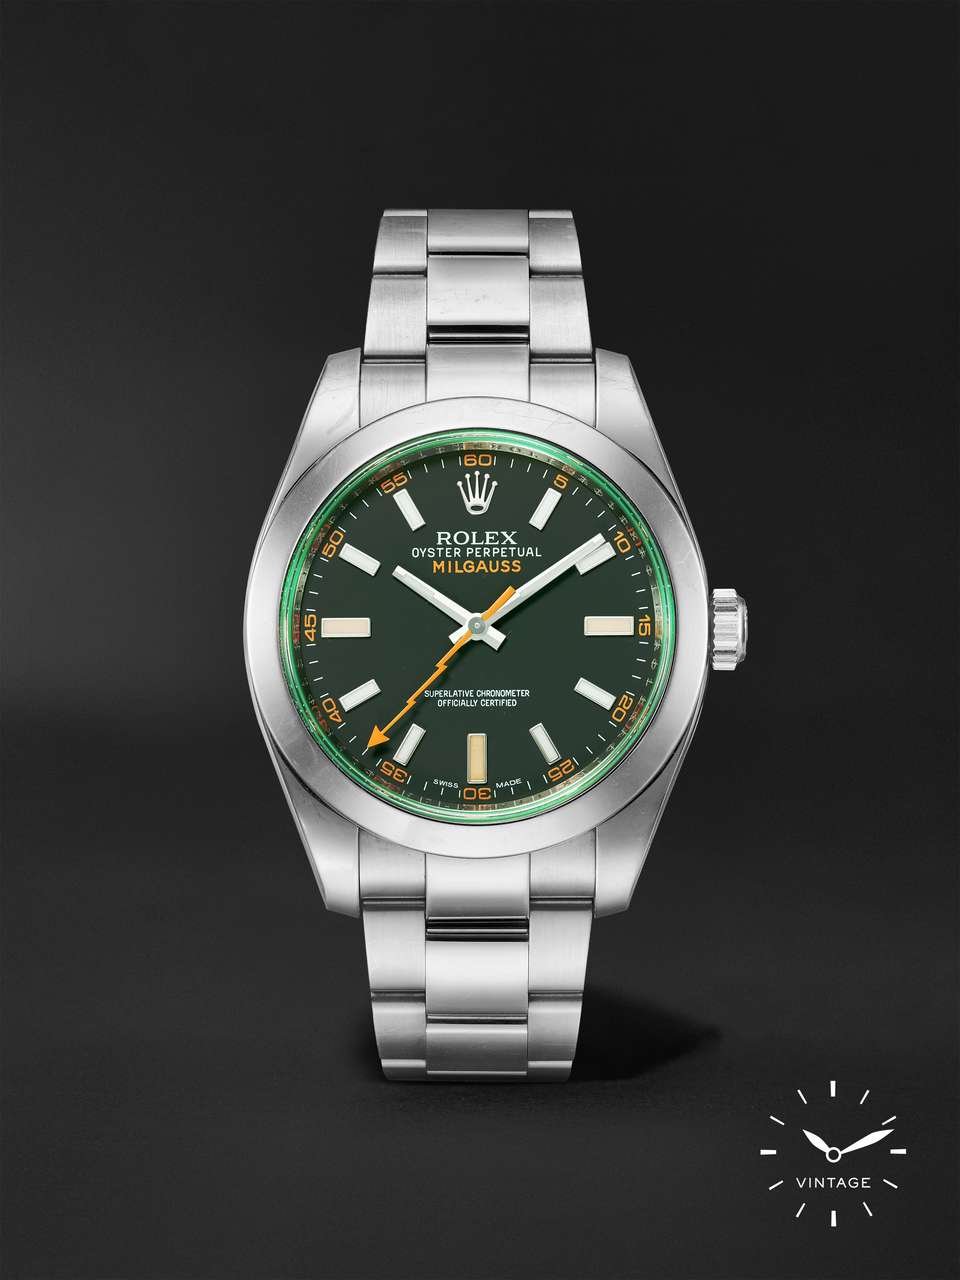 ROLEX Vintage Oyster Perpetual Milgauss Automatic 39mm Stainless Steel Watch, Ref. No. 116400GV